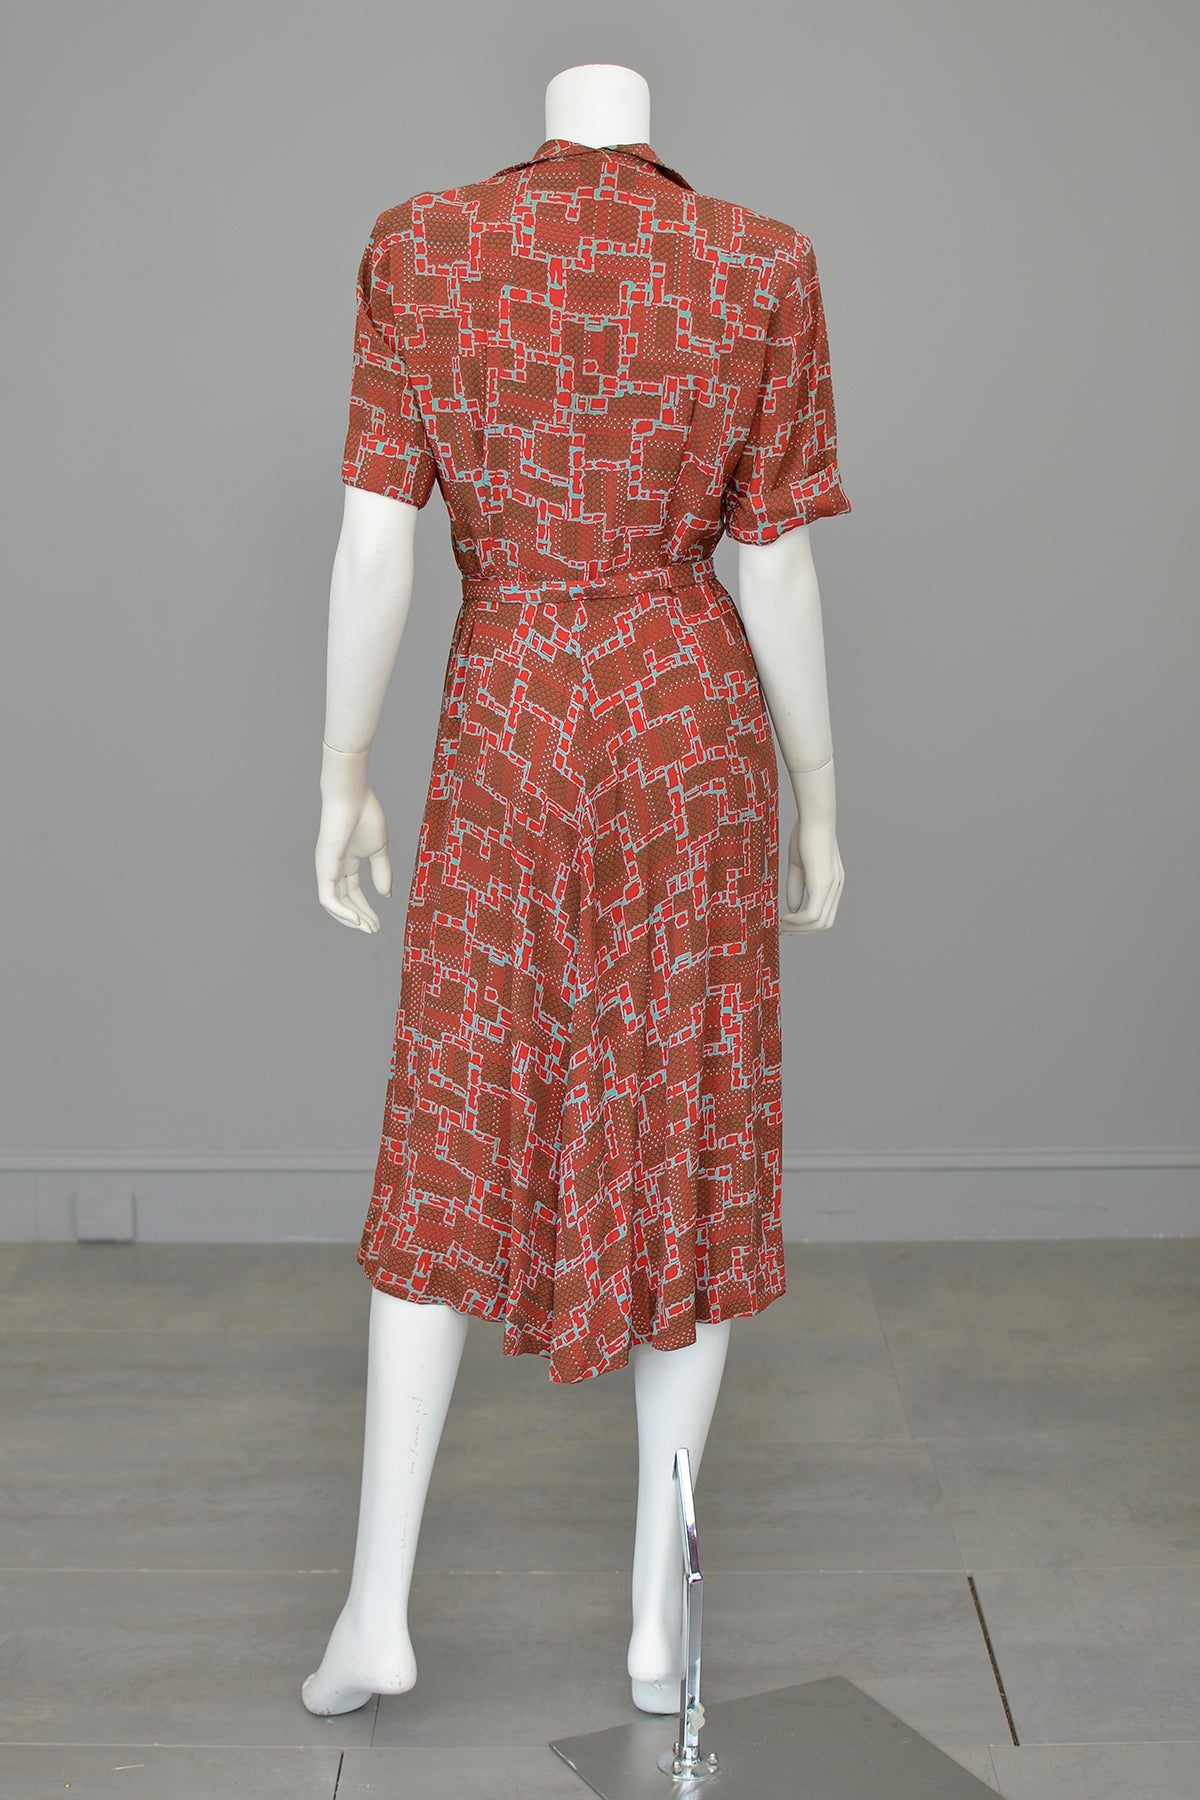 1940s Geometric Print Dress in Brick Red, Olive Green and Aqua Blue | Wounded Bird